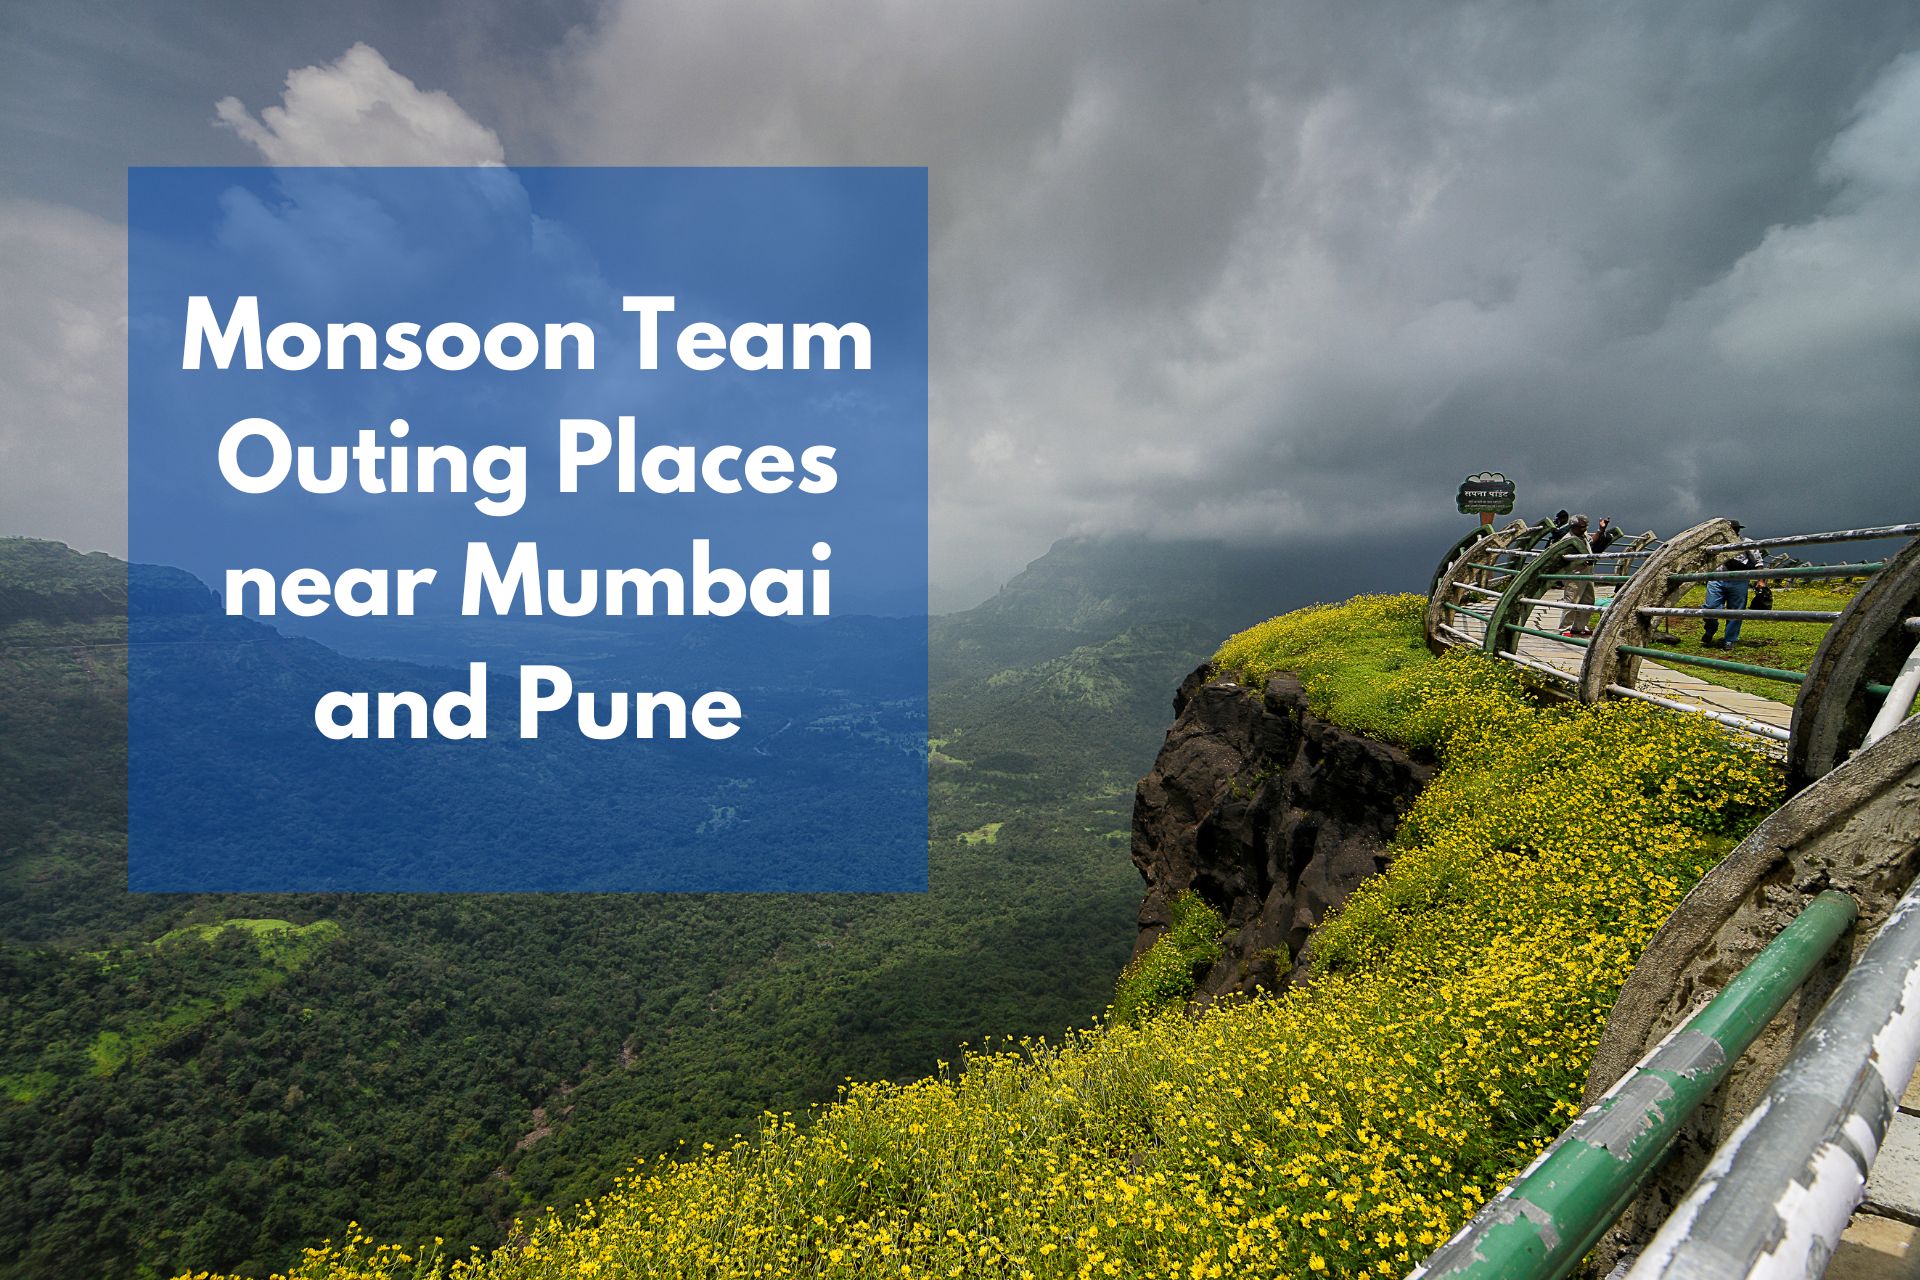 Monsoon Team Outing Places near Mumbai and Pune